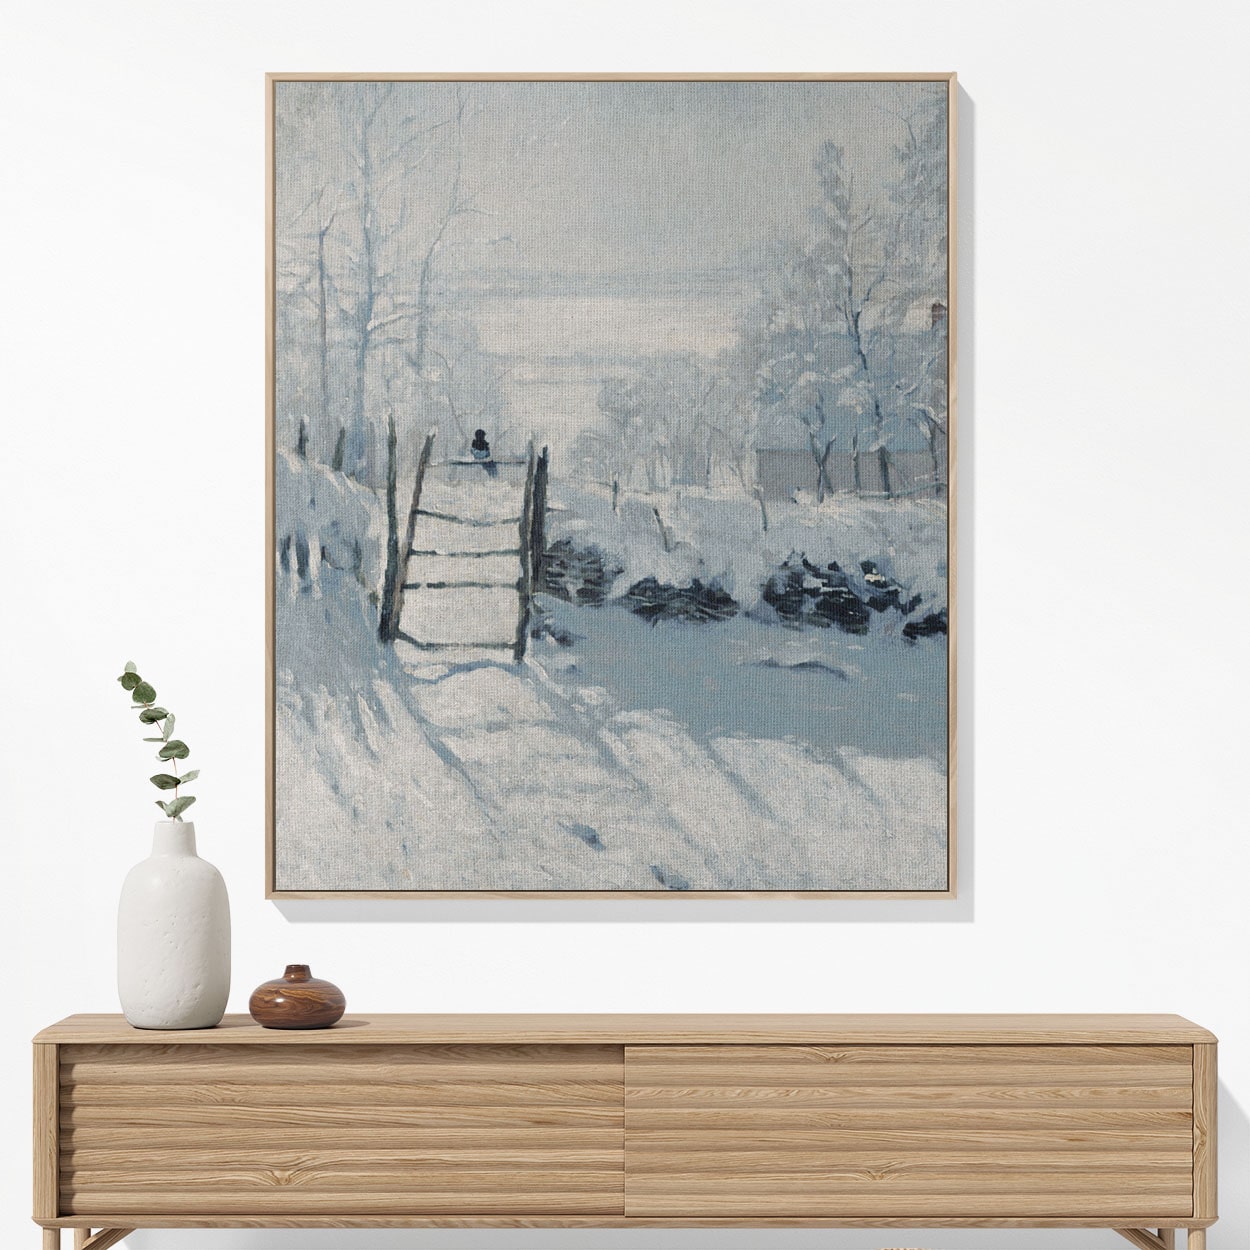 Winter Woven Blanket Woven Blanket Hanging on a Wall as Framed Wall Art